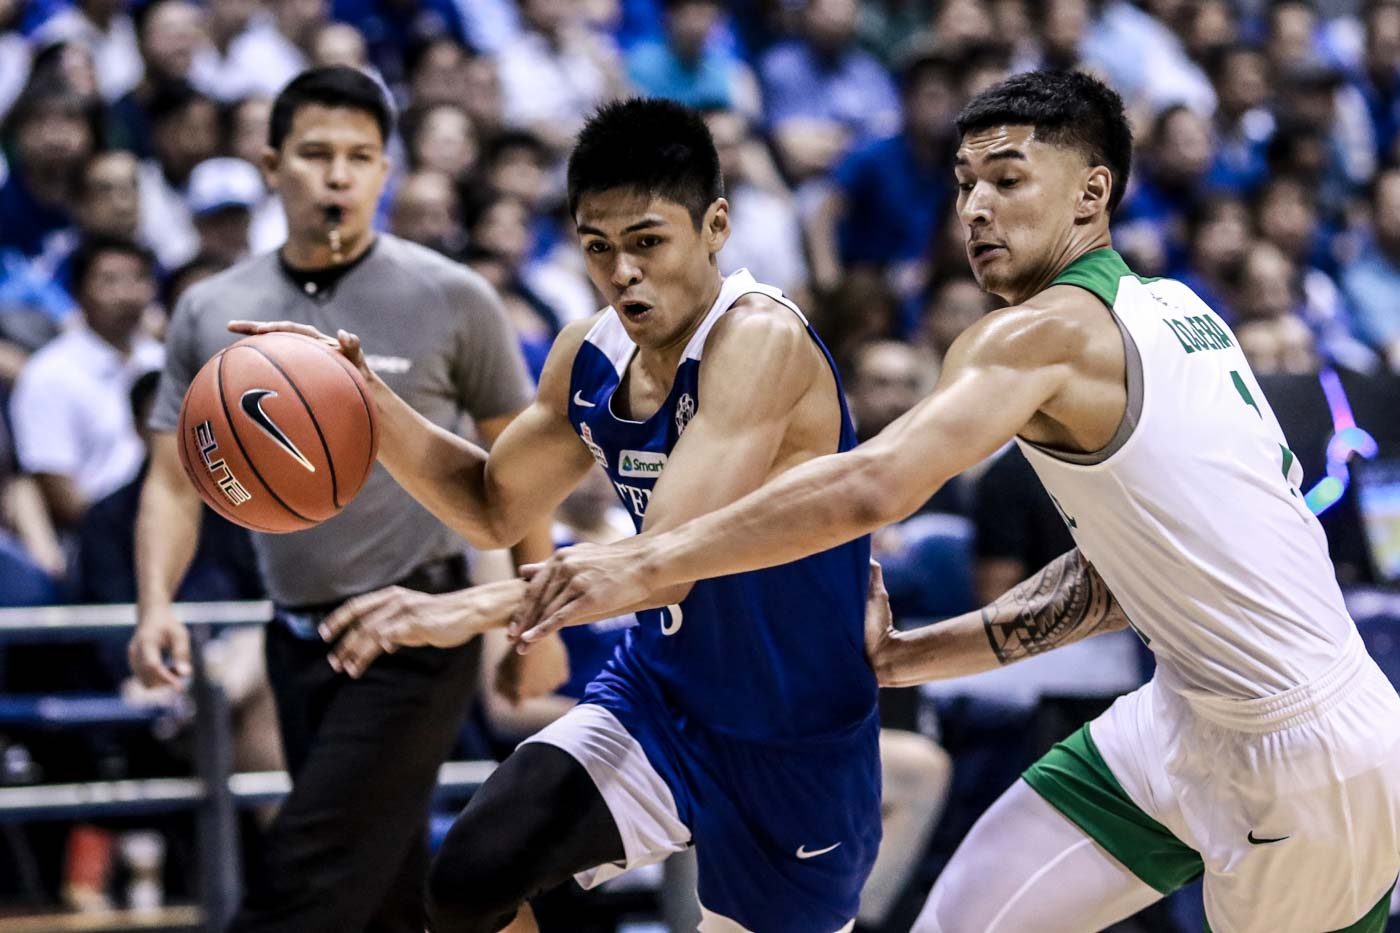 September UAAP opening looks unlikely, league officials say